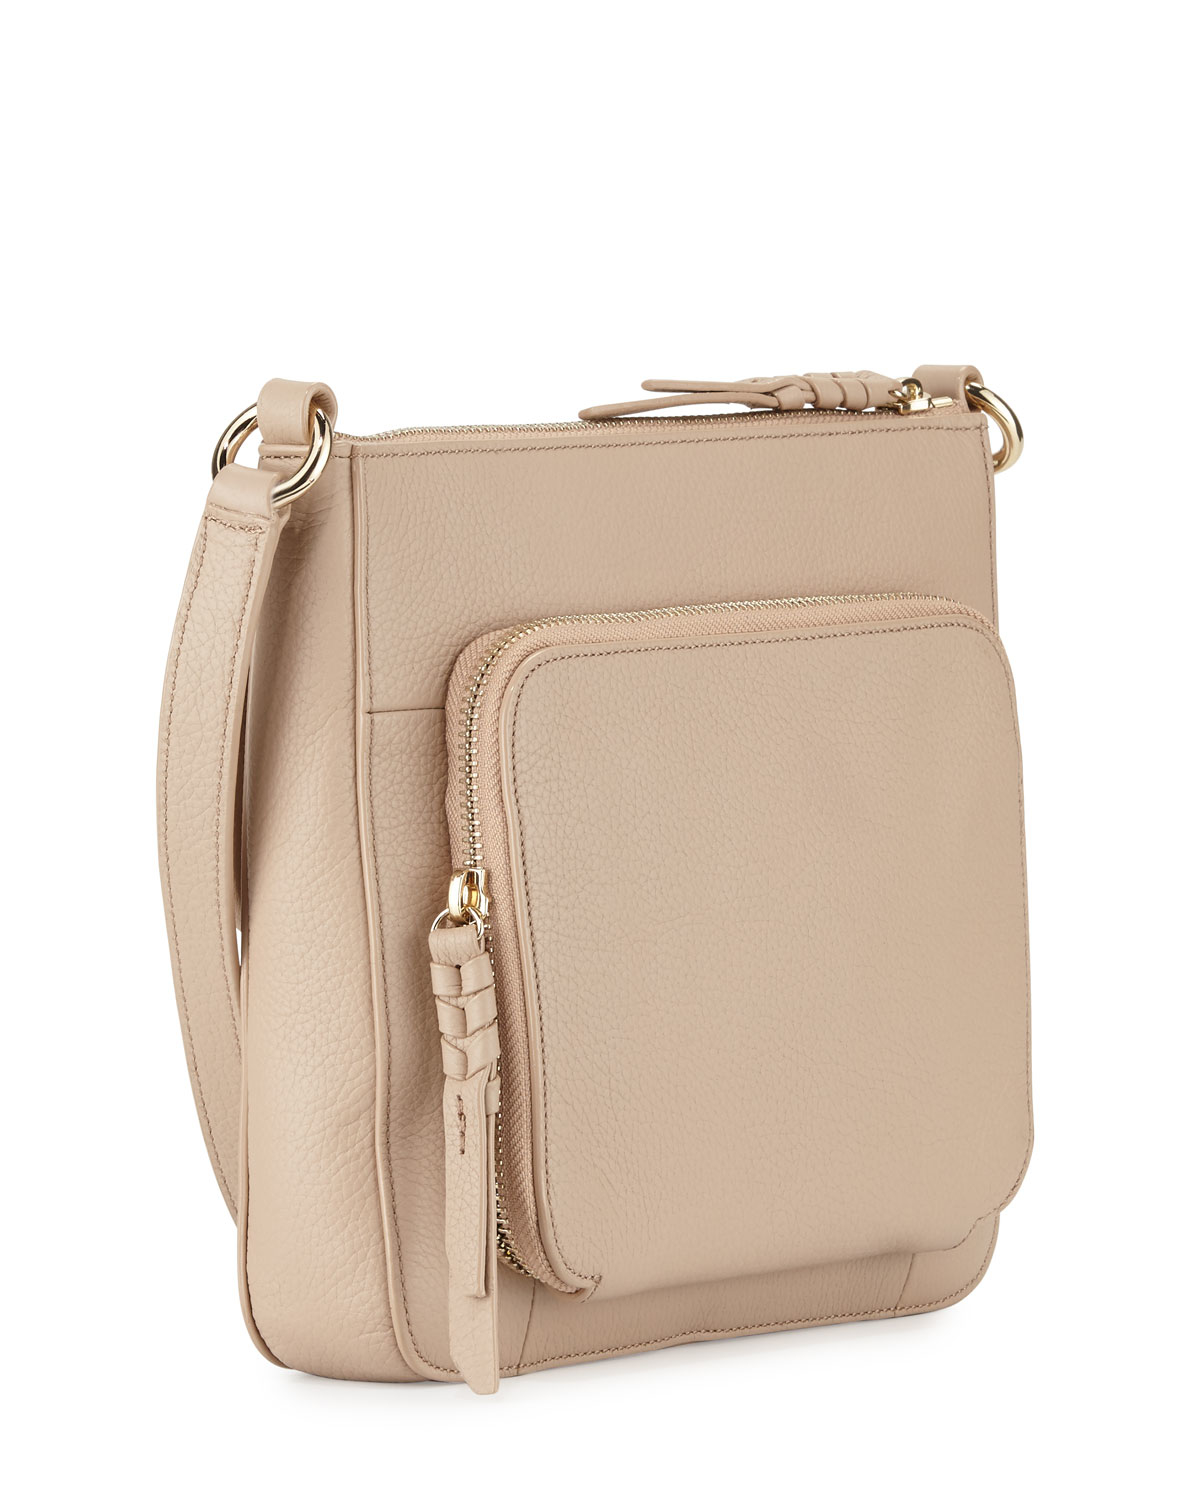 Lyst - Cole Haan Amherst Leather Crossbody Bag in Natural